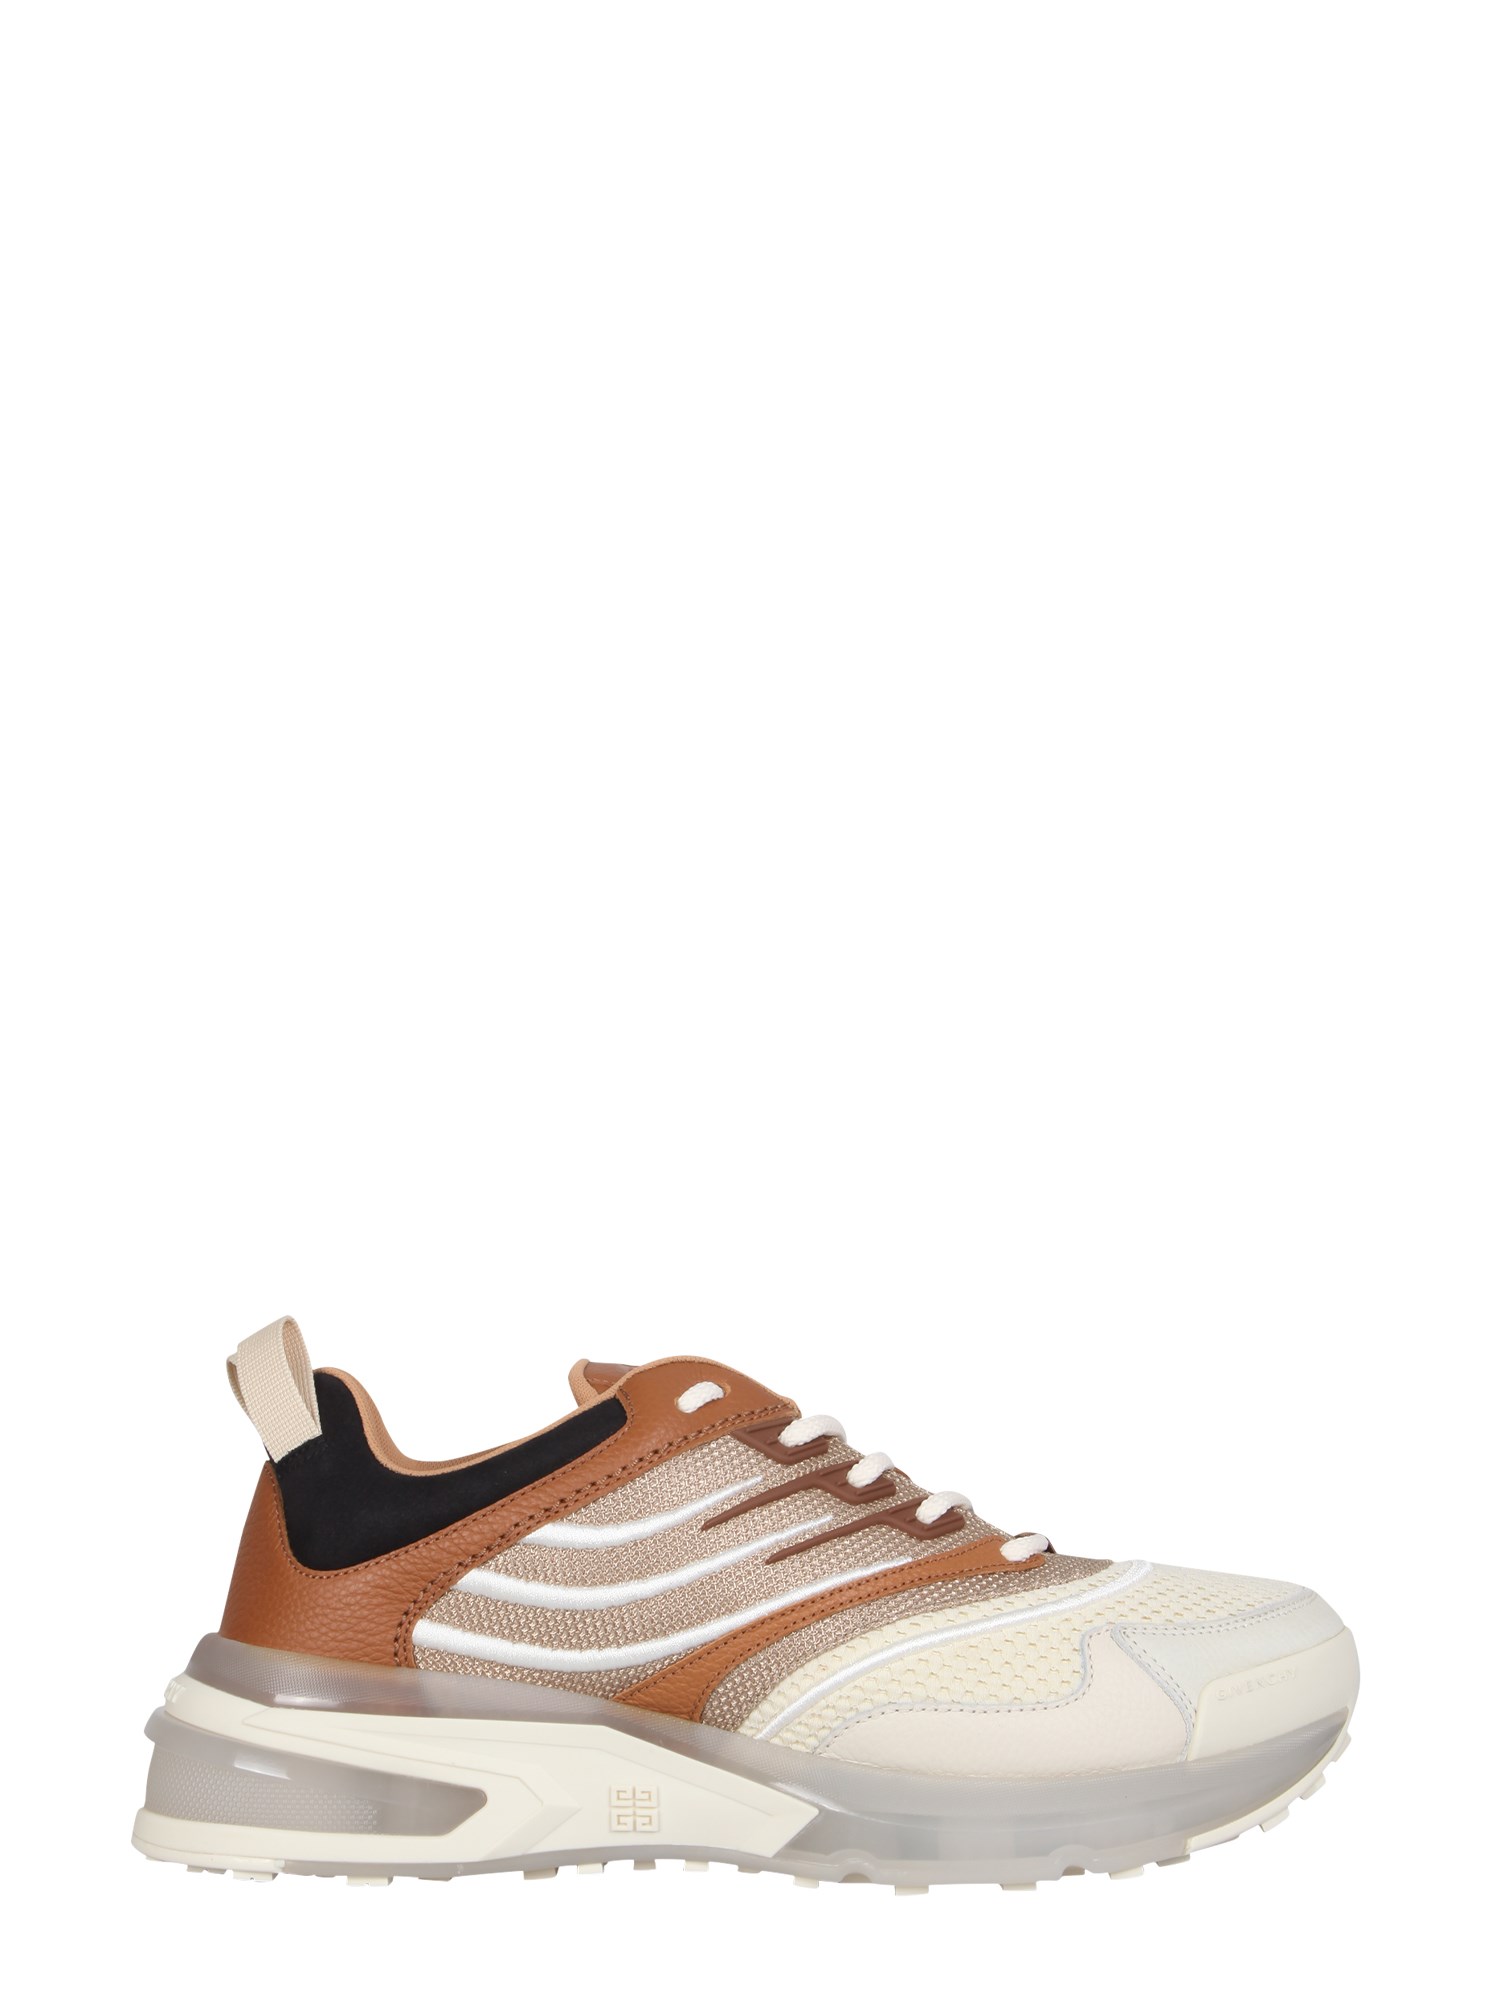 givenchy giv 1 runner sneakers